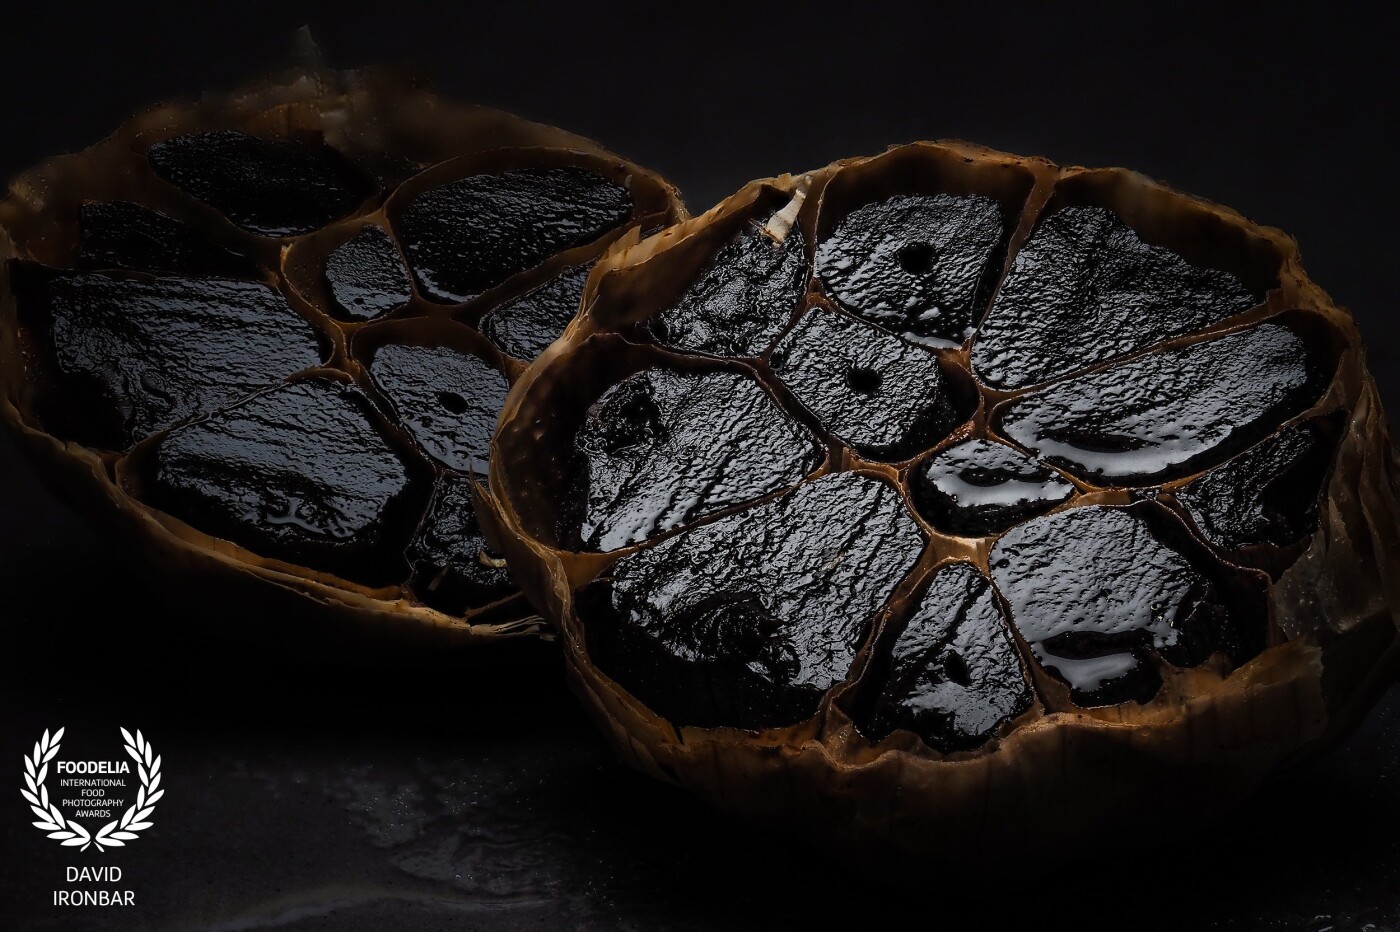 Black garlic has a tender, almost jelly-like texture with a melt-in-your-mouth consistency with twice as many antioxidants as raw garlic. It also contains S-Allycysteine, a natural compound that has been proven to be a factor in cancer prevention.